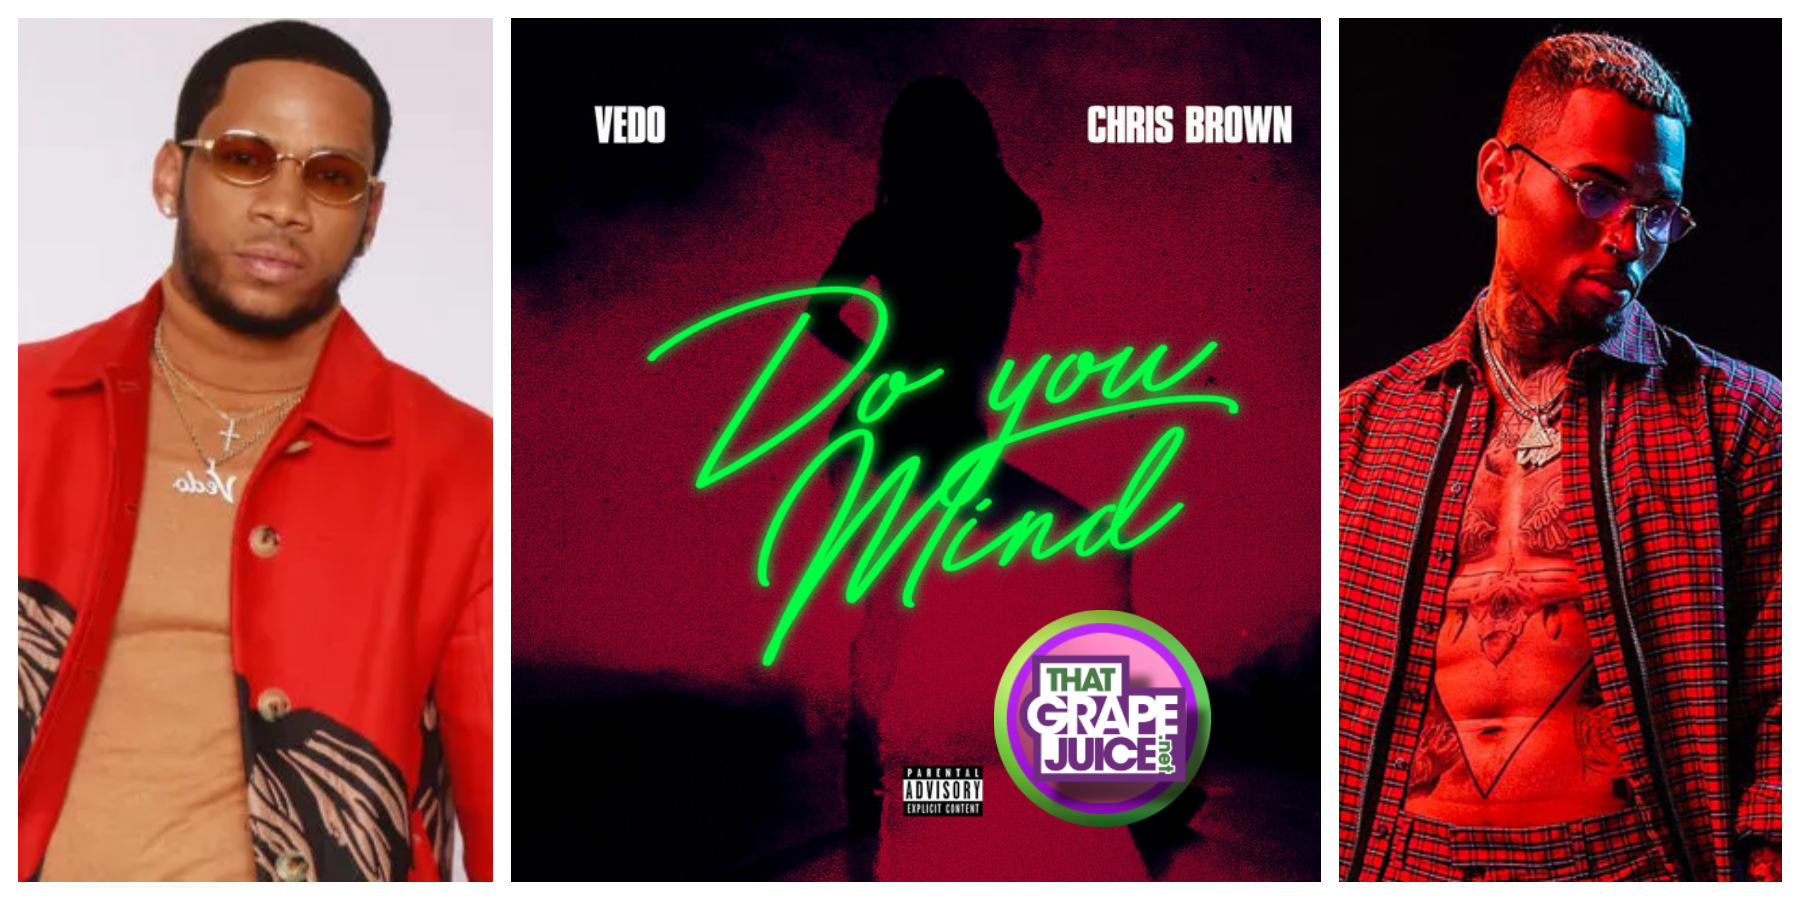 New Song Vedo 'Do You Mind' (featuring Chris Brown) That Grape Juice